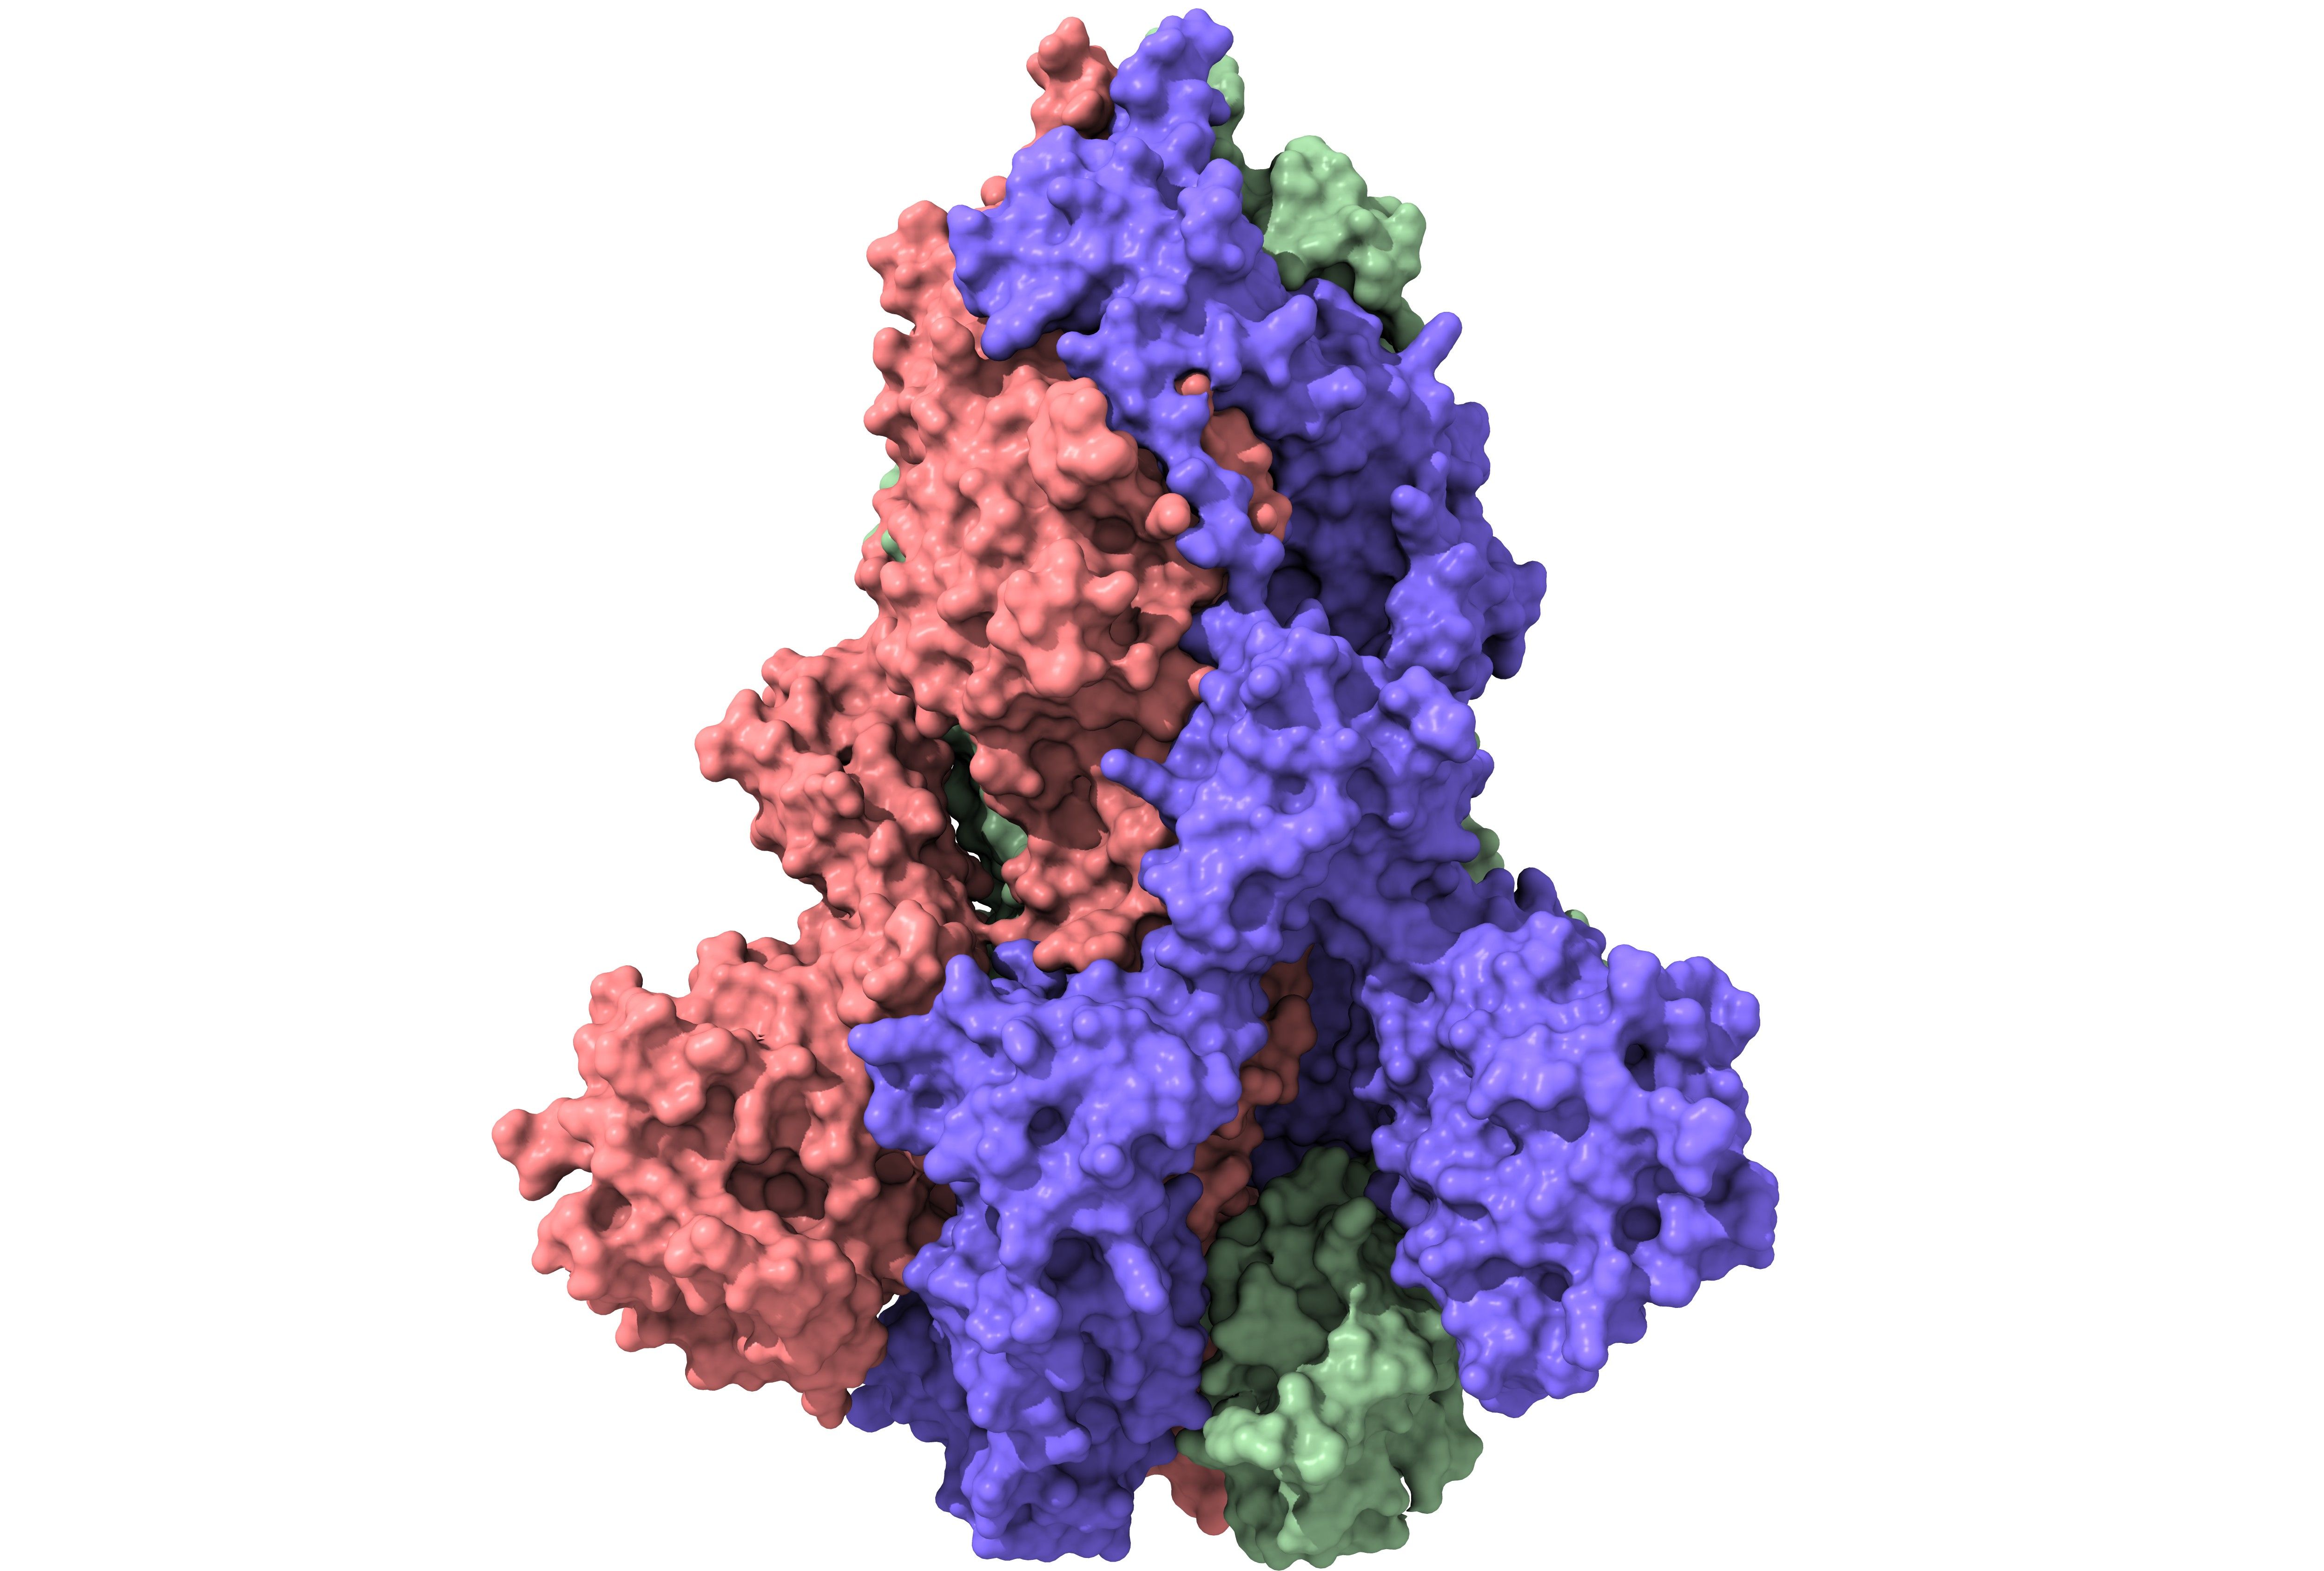 For a potential COVID-19 vaccine, the spike protein (structural model pictured) of the pandemic coronavirus was stabilized by a bit of an HIV protein. Image by Volodymyr Dvornyk / Shutterstock.